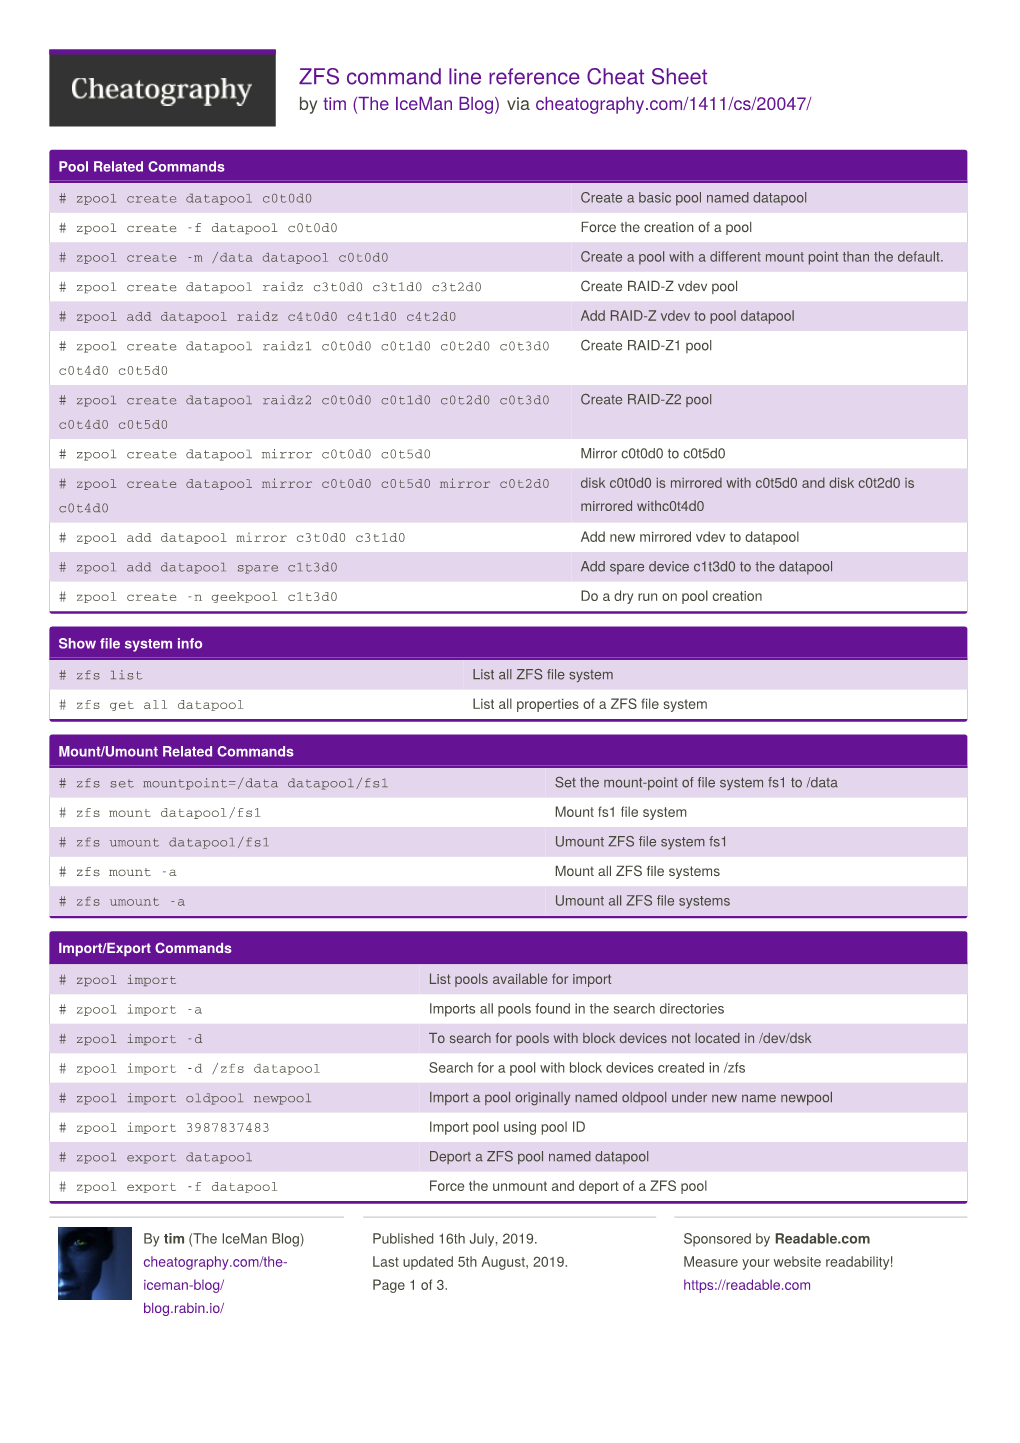 ZFS Command Line Reference Cheat Sheet by the Iceman Blog